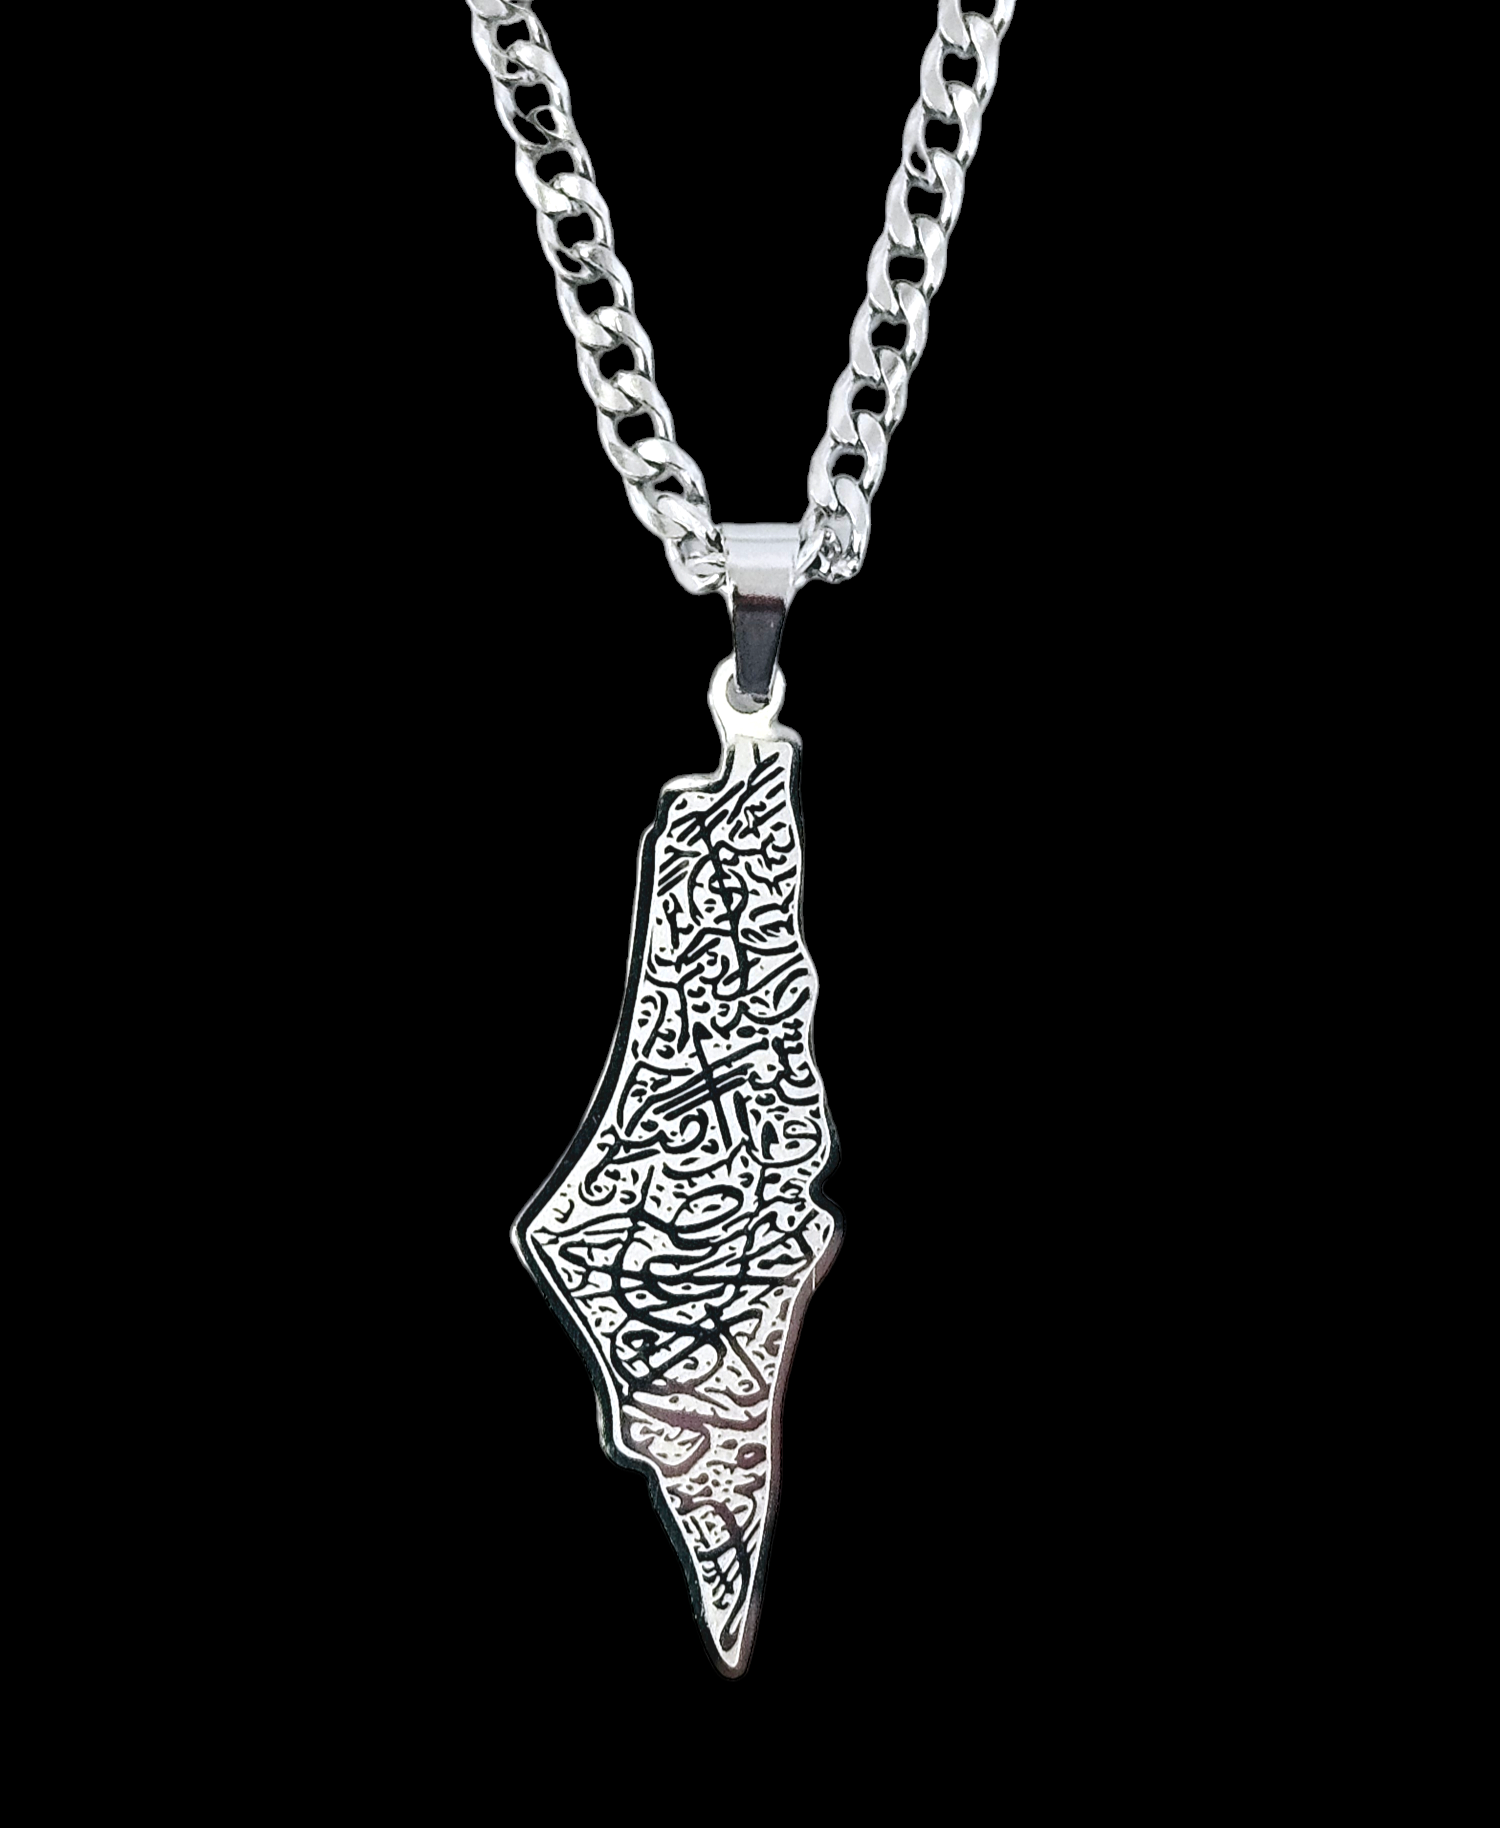 Palestine Map Necklace with Arabic Calligraphy - Habibi Heritage